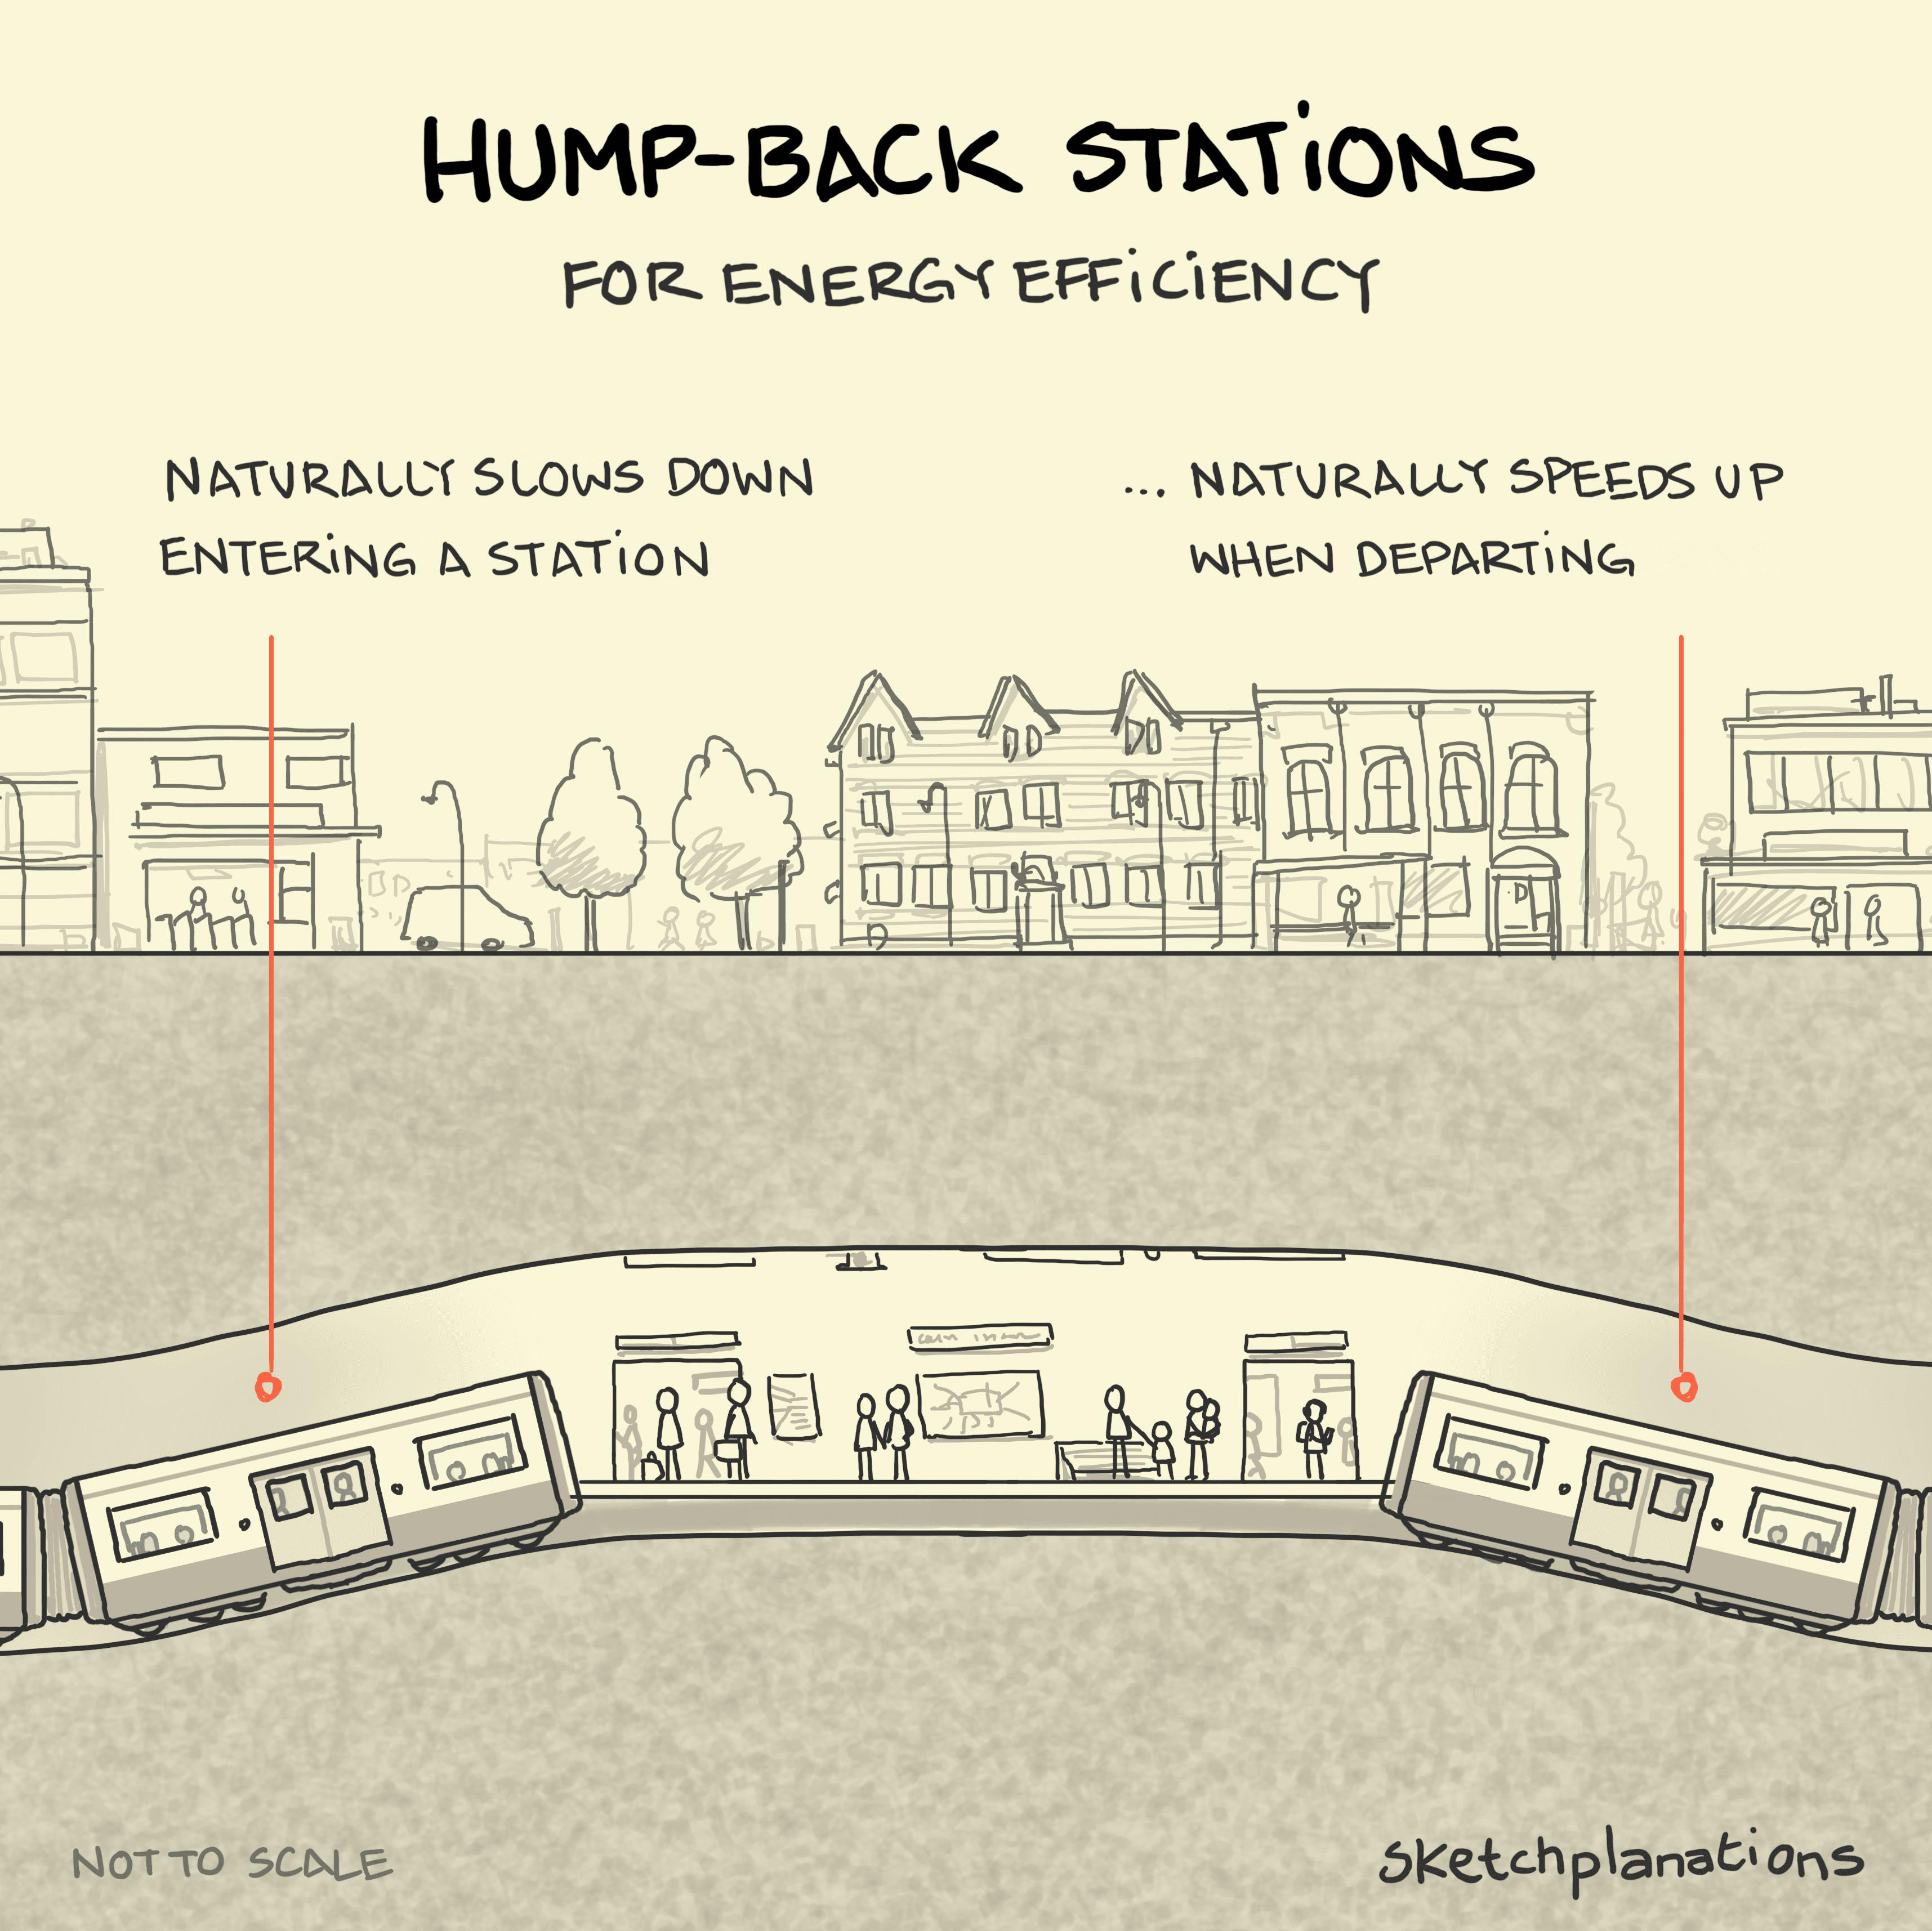 Hump-Back Stations illustration: an above and below ground cross-section of an urban environment is shown, displaying the rise and fall of an underground transit tunnel as it approaches and departs a station platform - allowing gravity to play its part in slowing the train down, uphill as it comes into a station and accelerating it away, downhill on departure. 